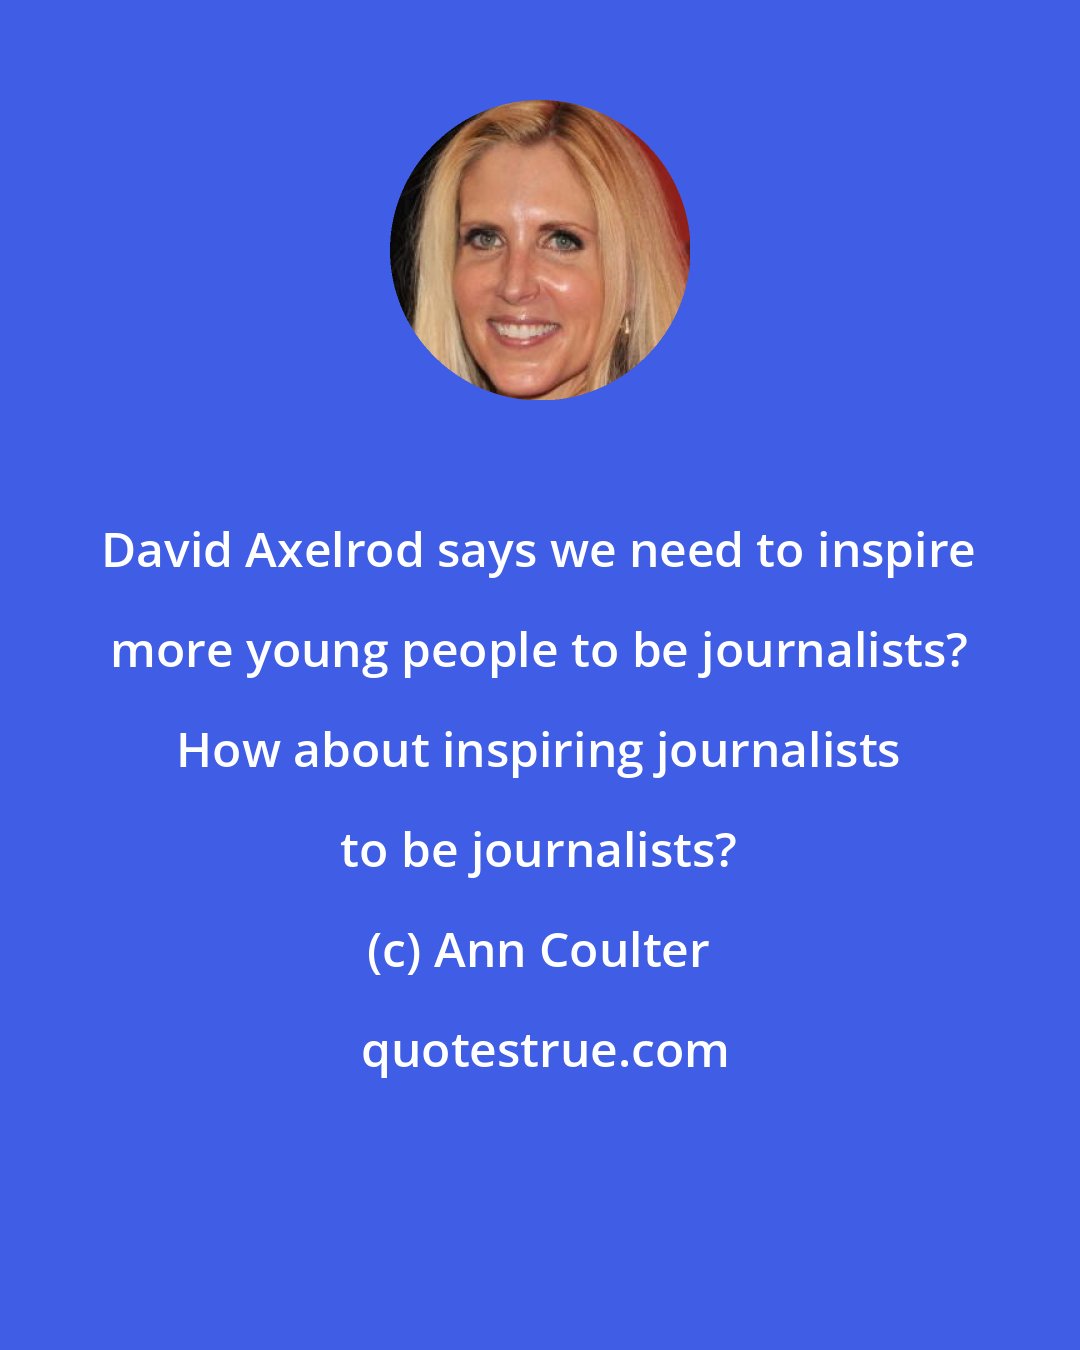 Ann Coulter: David Axelrod says we need to inspire more young people to be journalists? How about inspiring journalists to be journalists?